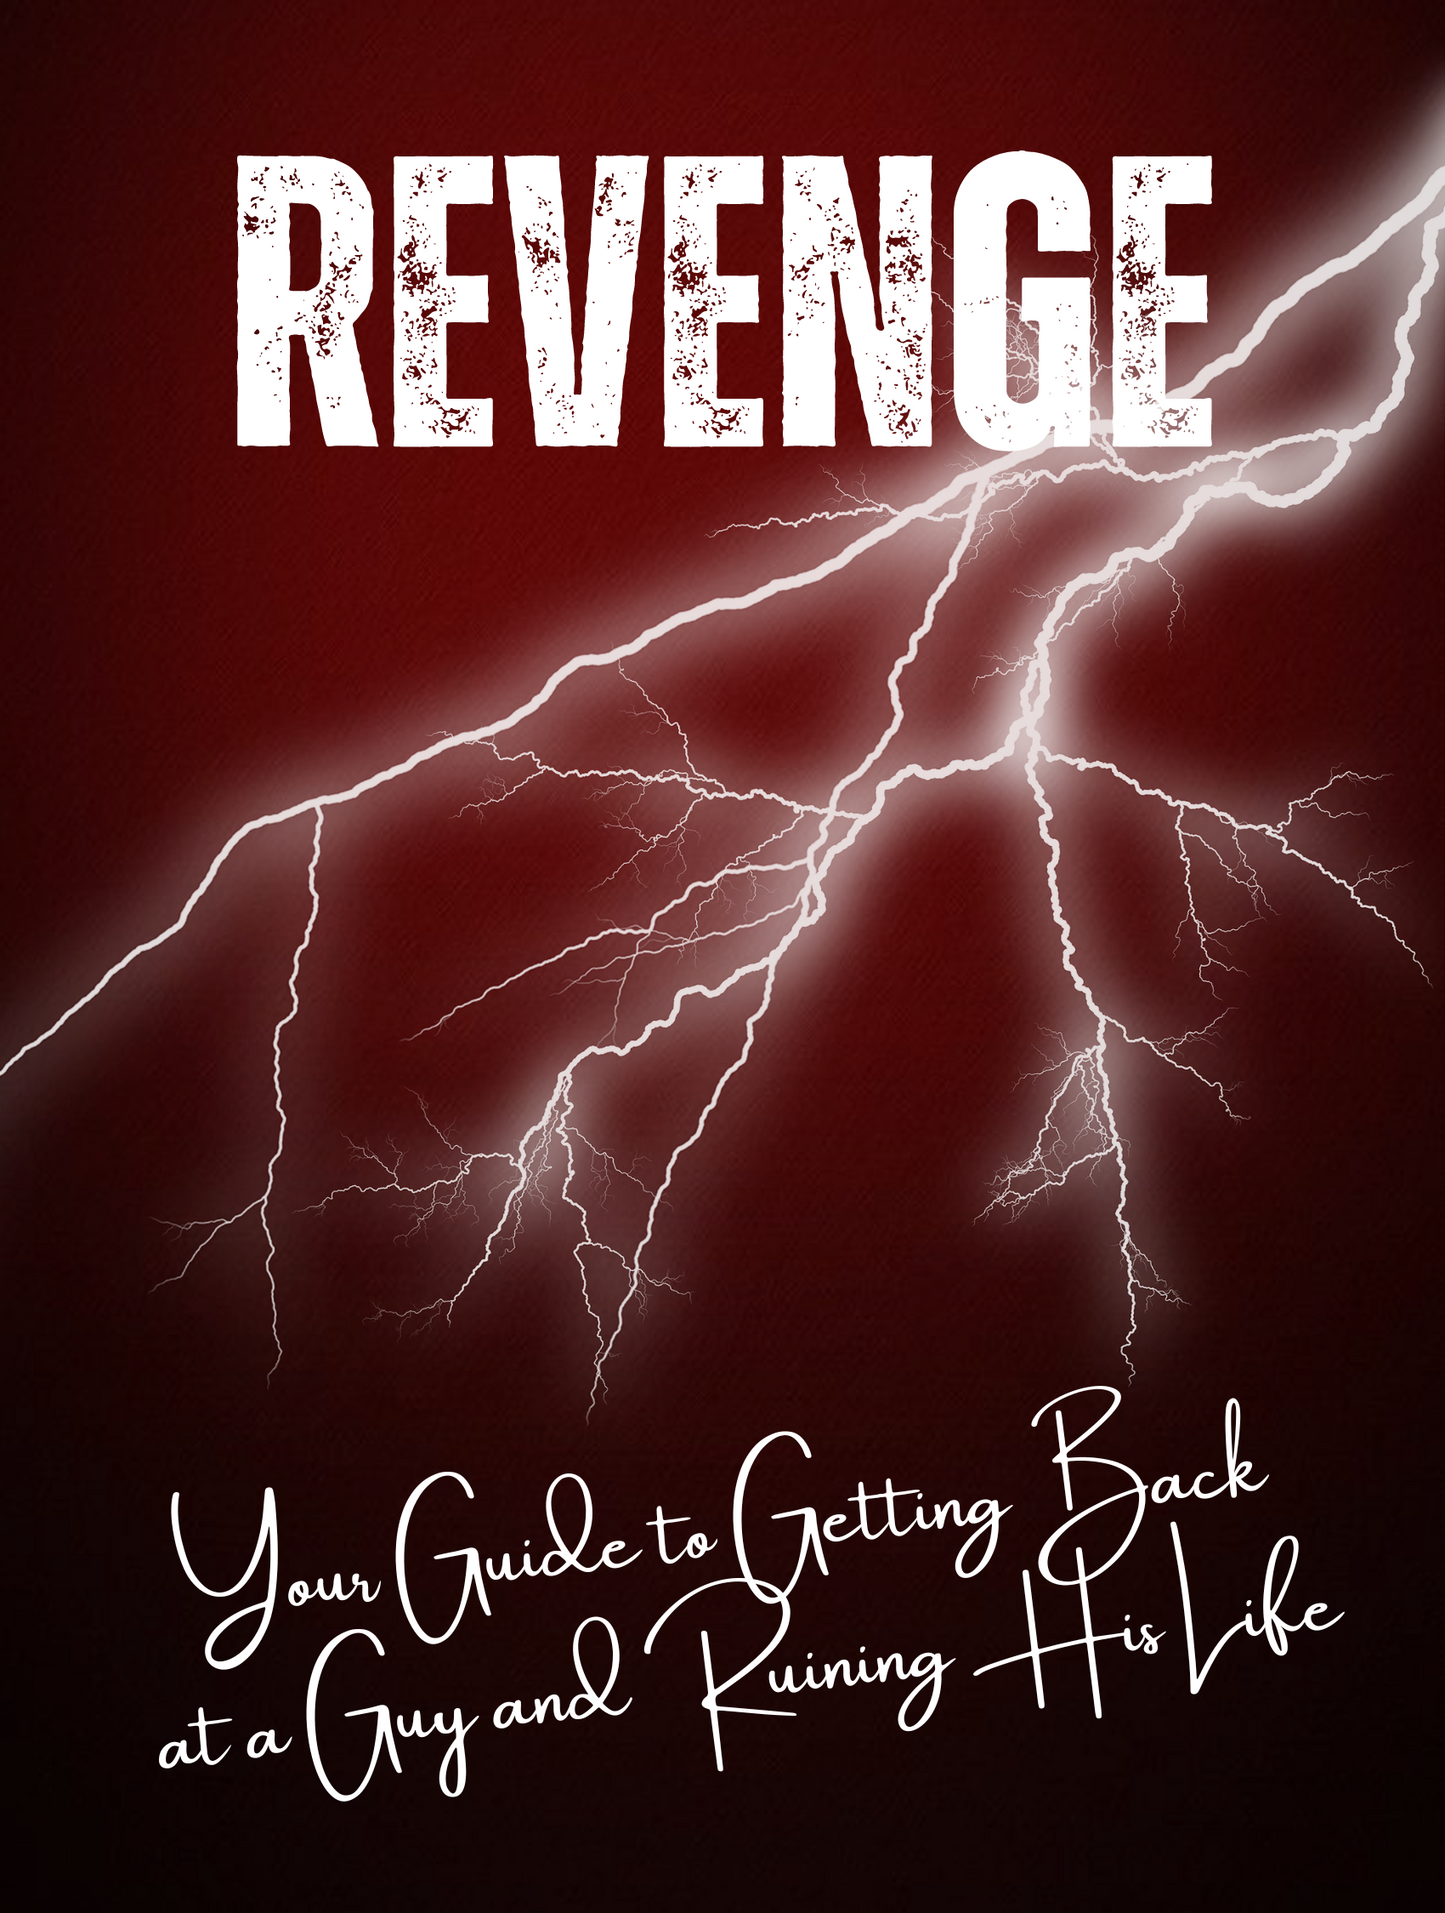 REVENGE; Get Back at a Guy and Ruin His Life